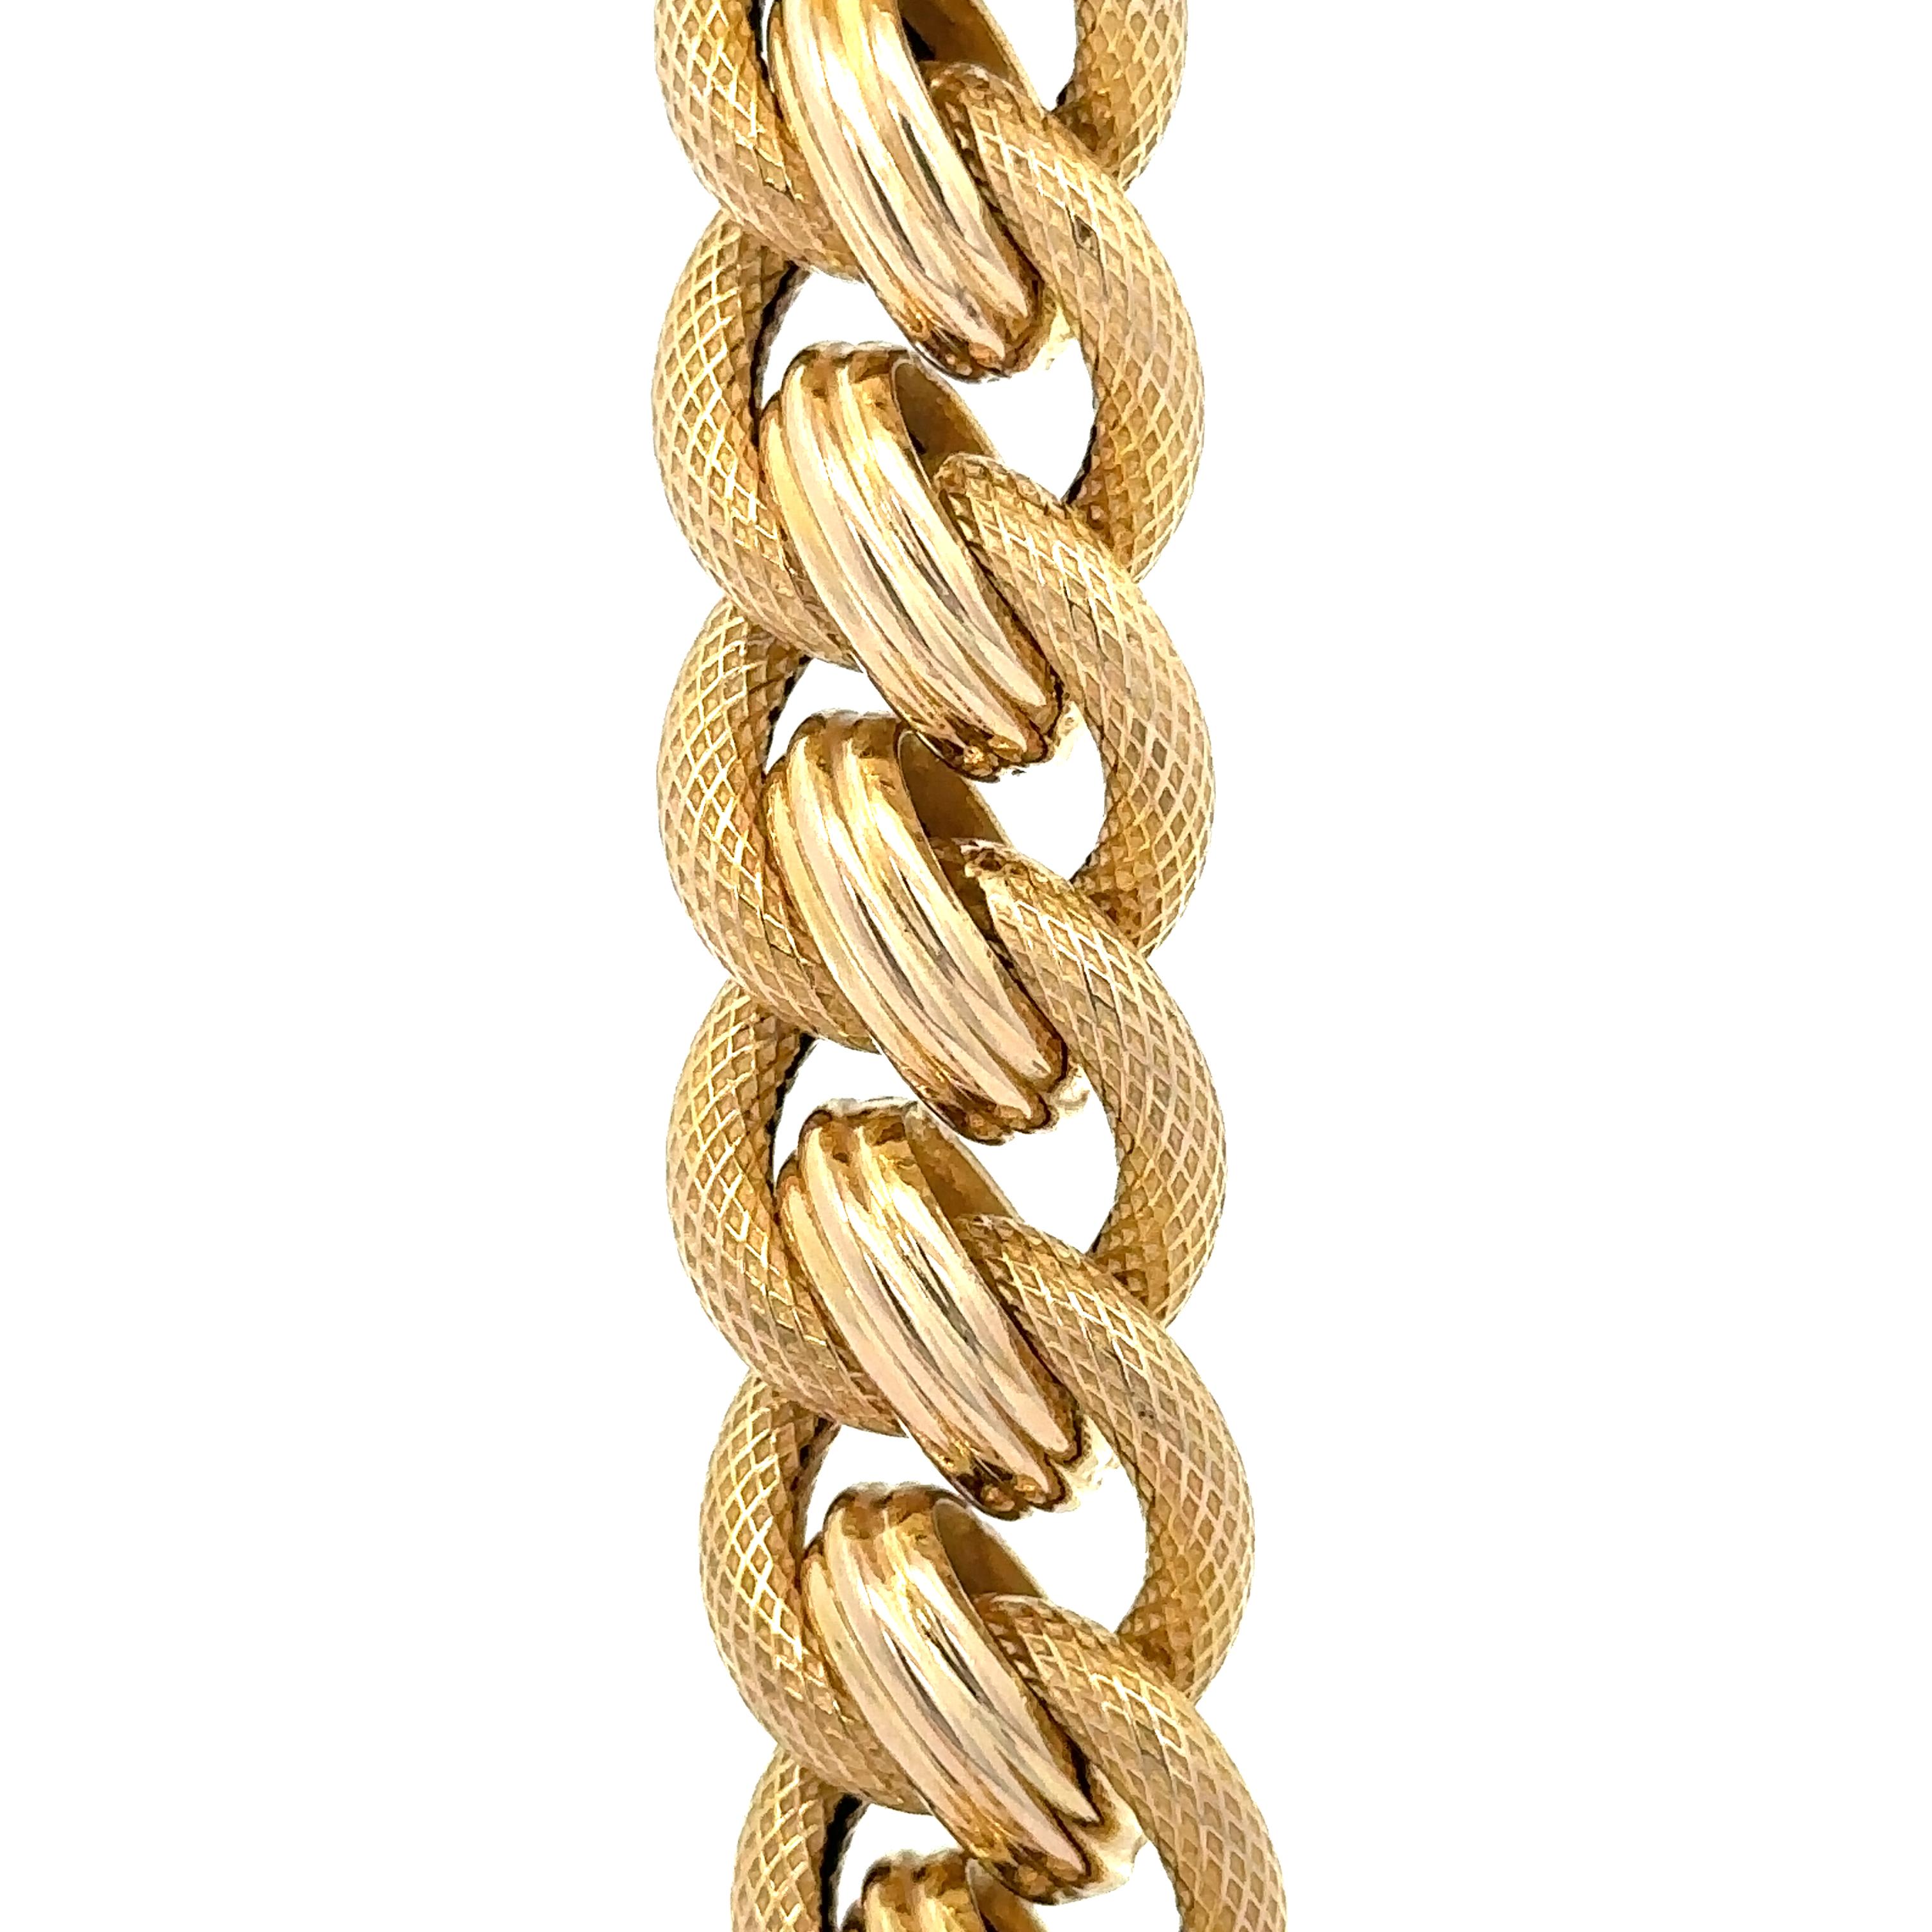 Material: Solid 14k Yellow Gold
Weight: 64.7 Grams
Chain Type: Interlocking Textured Cable & polished Link
Chain Length:	17 Inches (next to a ruler)
Chain Width: 15.2mm (approx.)
Clasp: Large Spring Ring
Condition: Excellent condition!
Stamp: